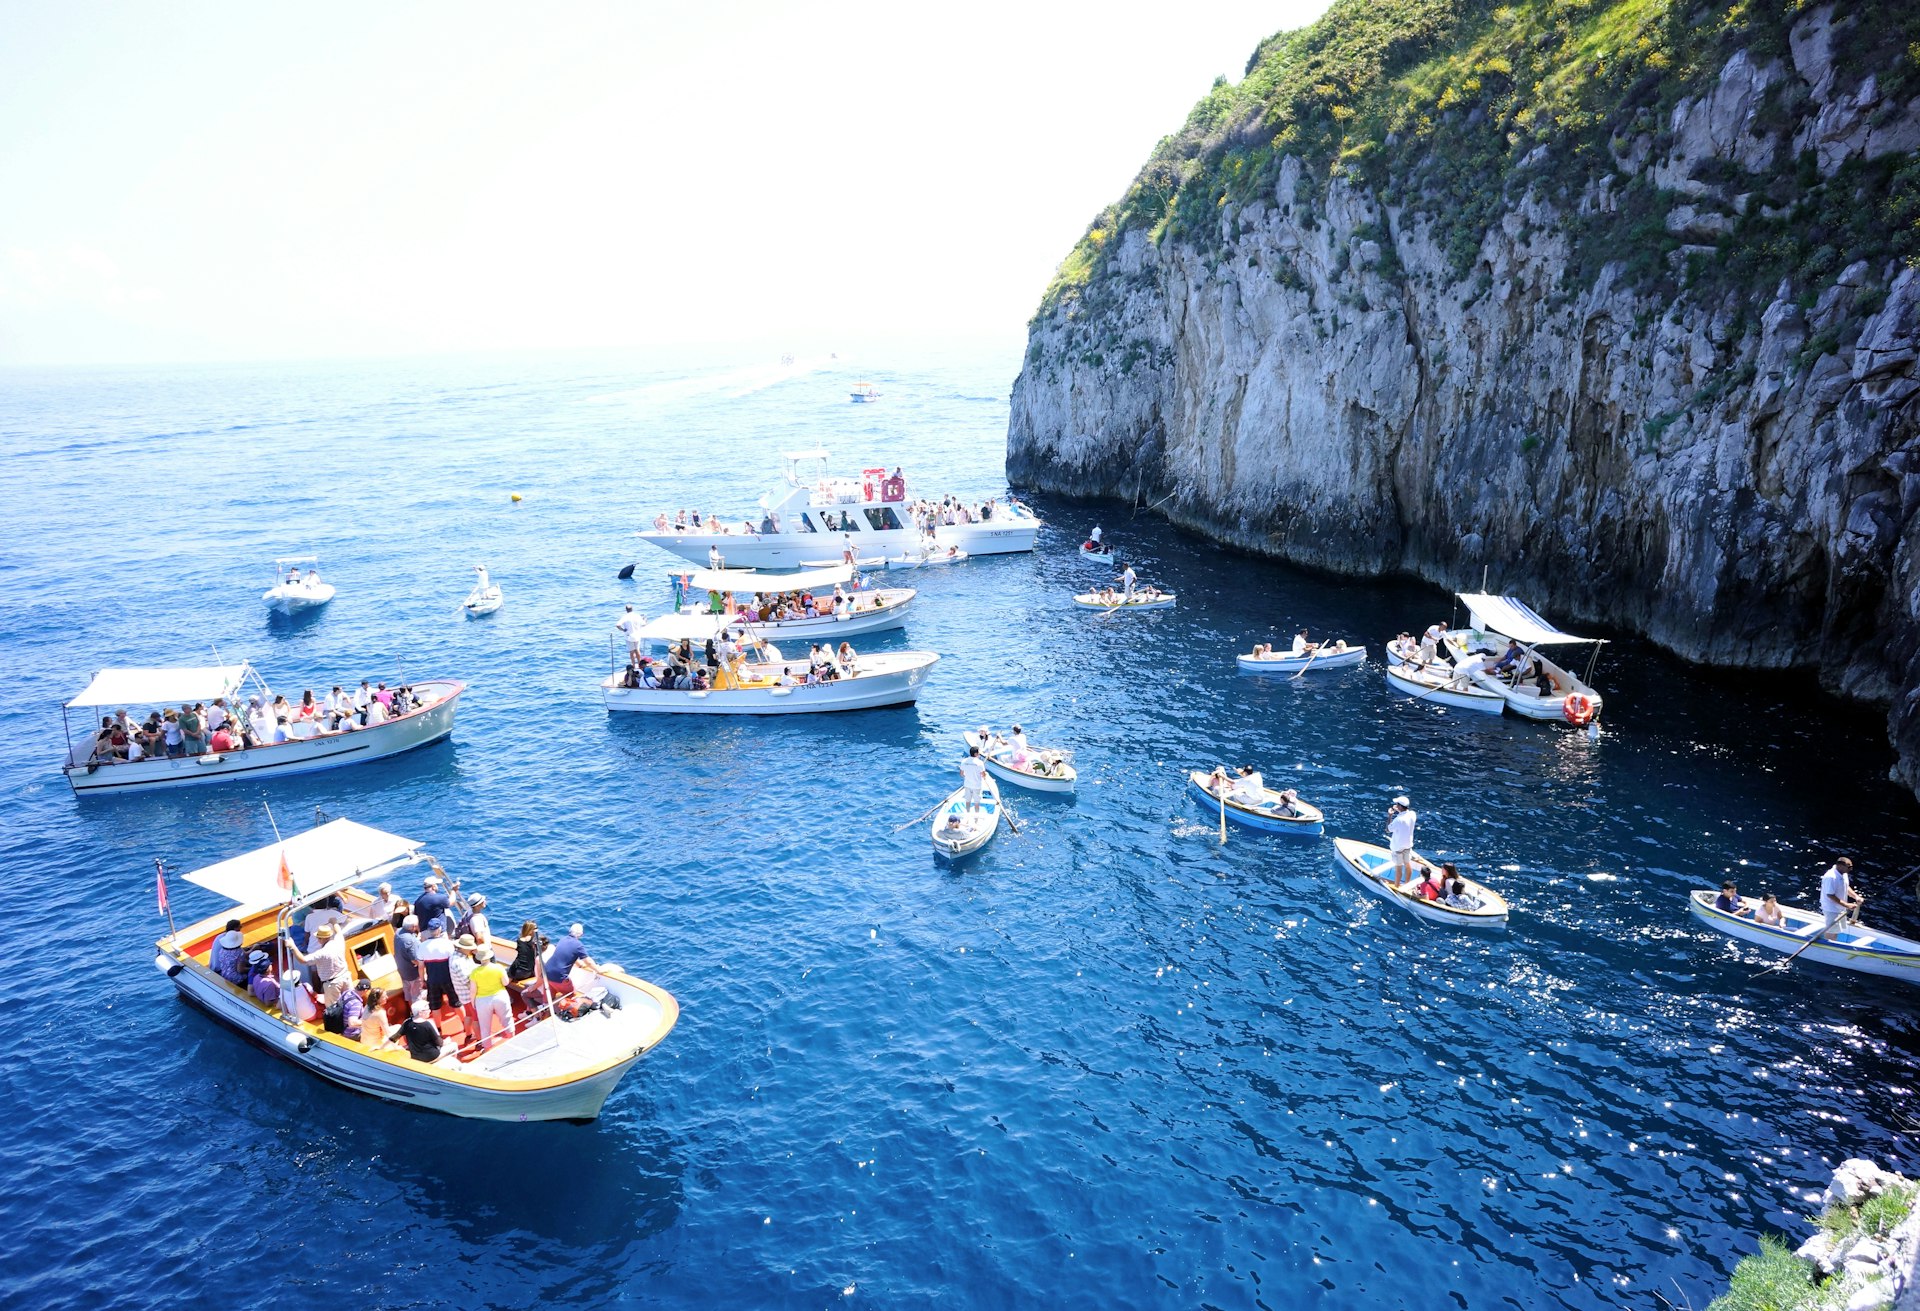 Boats in the water outside the entrance to Grotto Azzurro, Capri, Italy